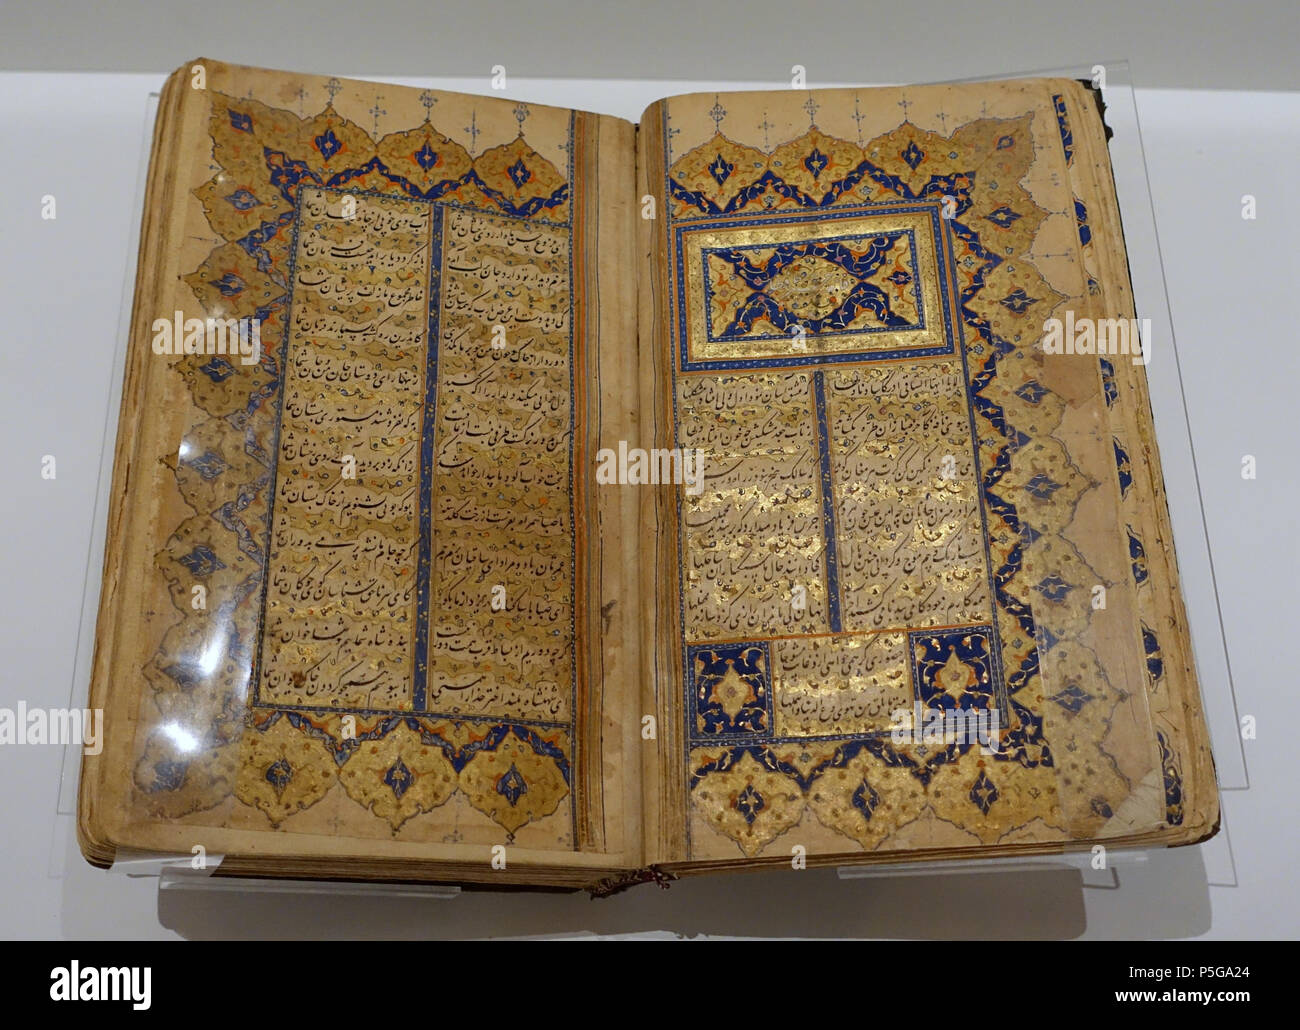 458 Divan, collected works, by Hafez, calligraphy by Enayatollah al-Shirazi, Iran, late 16th century AD, ink, watercolour, gold on paper - Aga Khan Museum - Toronto, Canada - DSC06699 Stock Photo